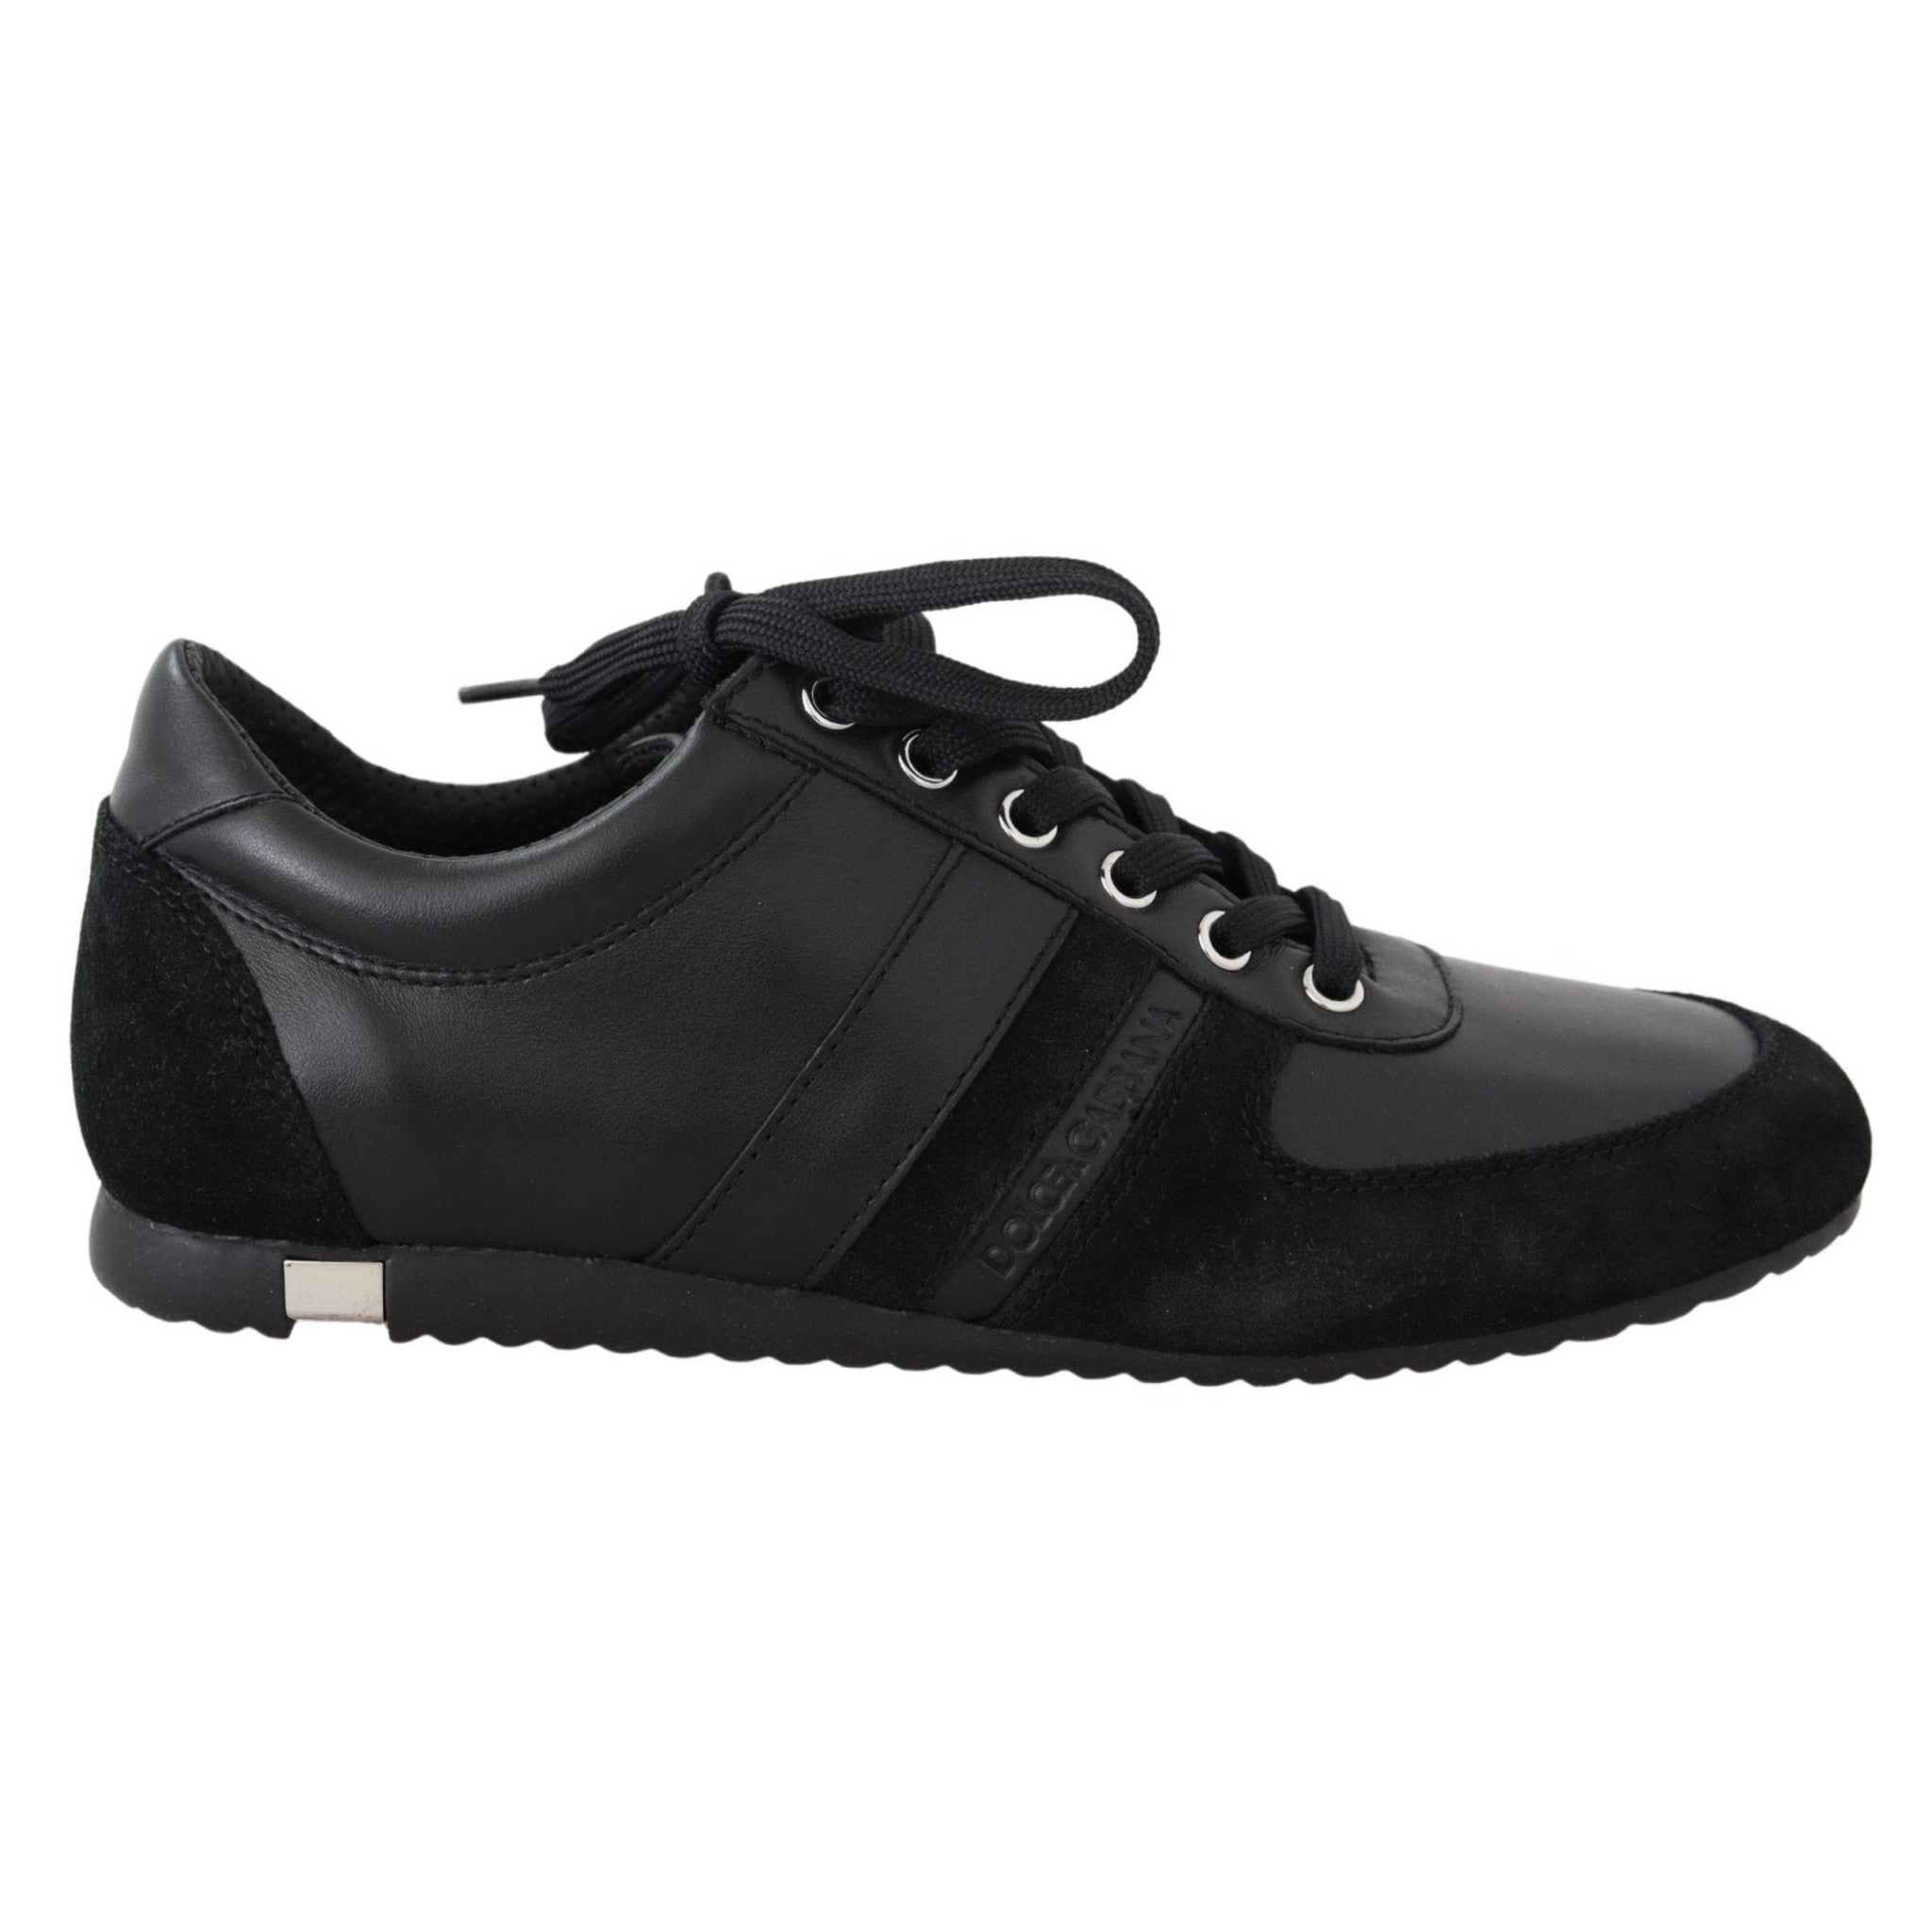 Dolce & Gabbana Black Logo Leather Casual Sneakers Shoes – Paris Deluxe